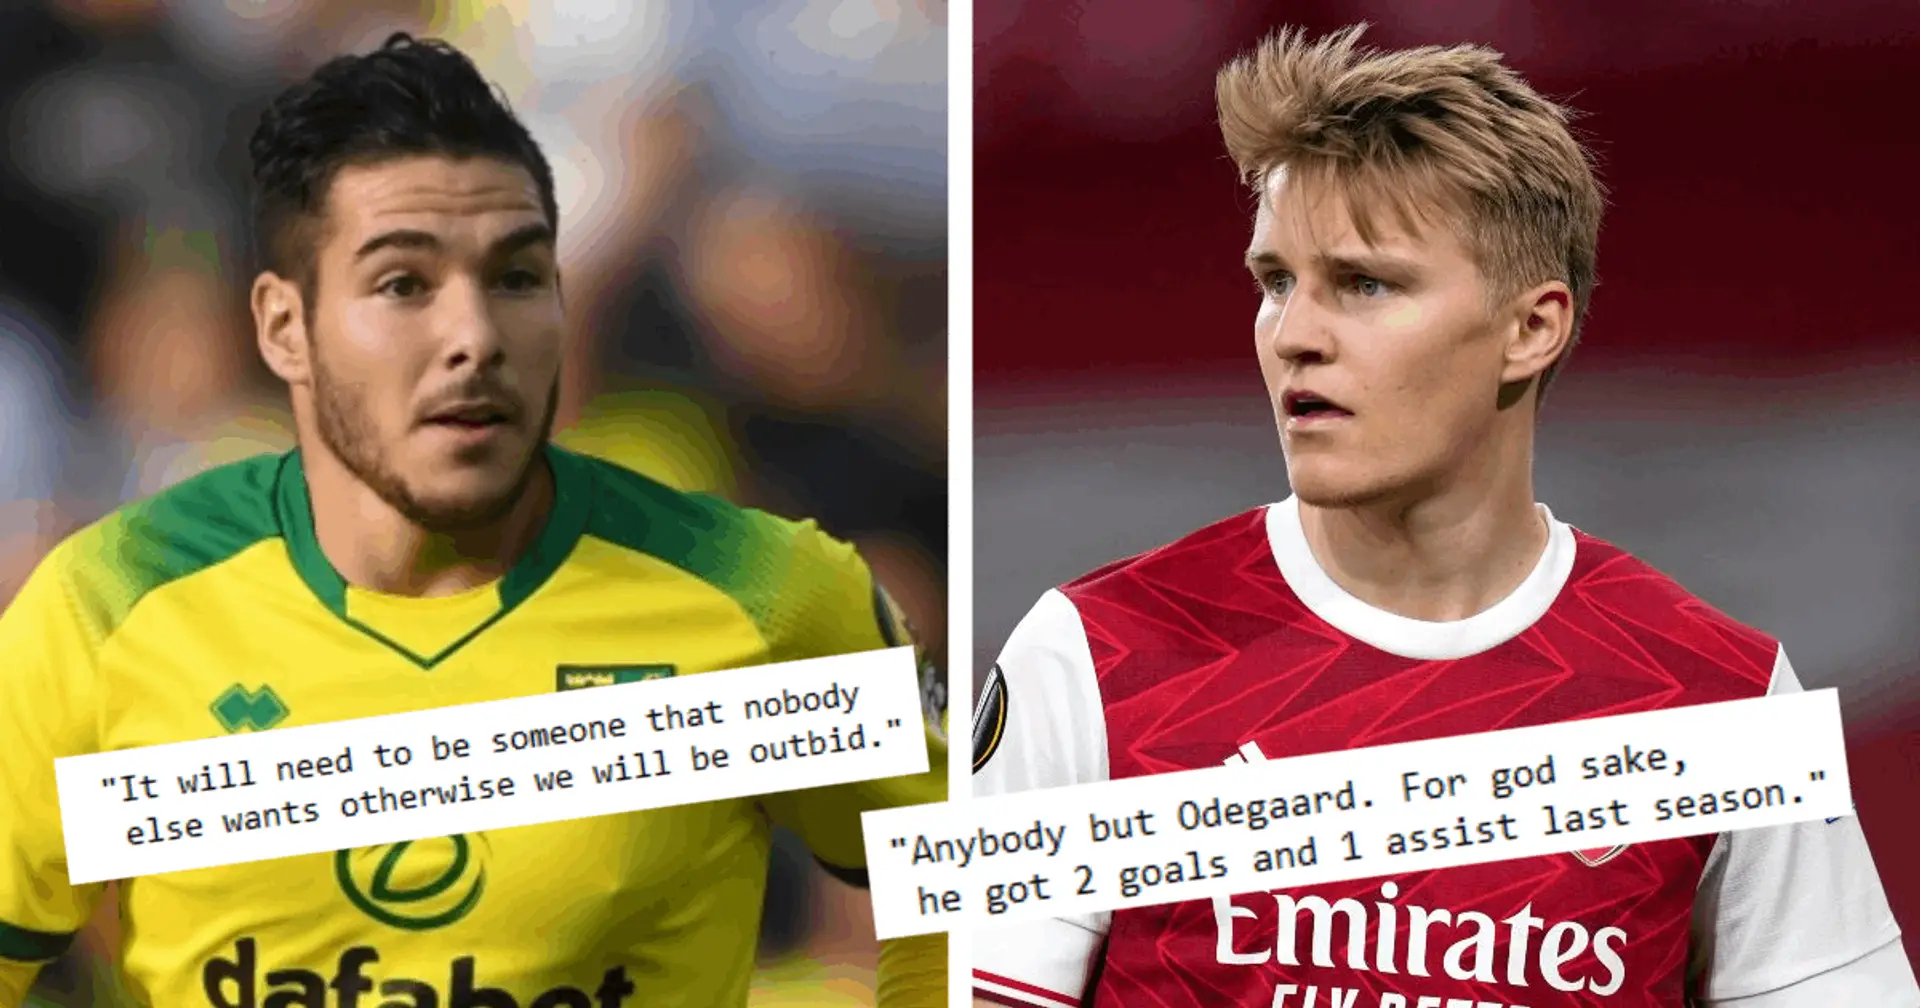 'Odegaard is just an ok player': Tribuna fans reflect on who Arsenal should sign after we missed out on Buendia